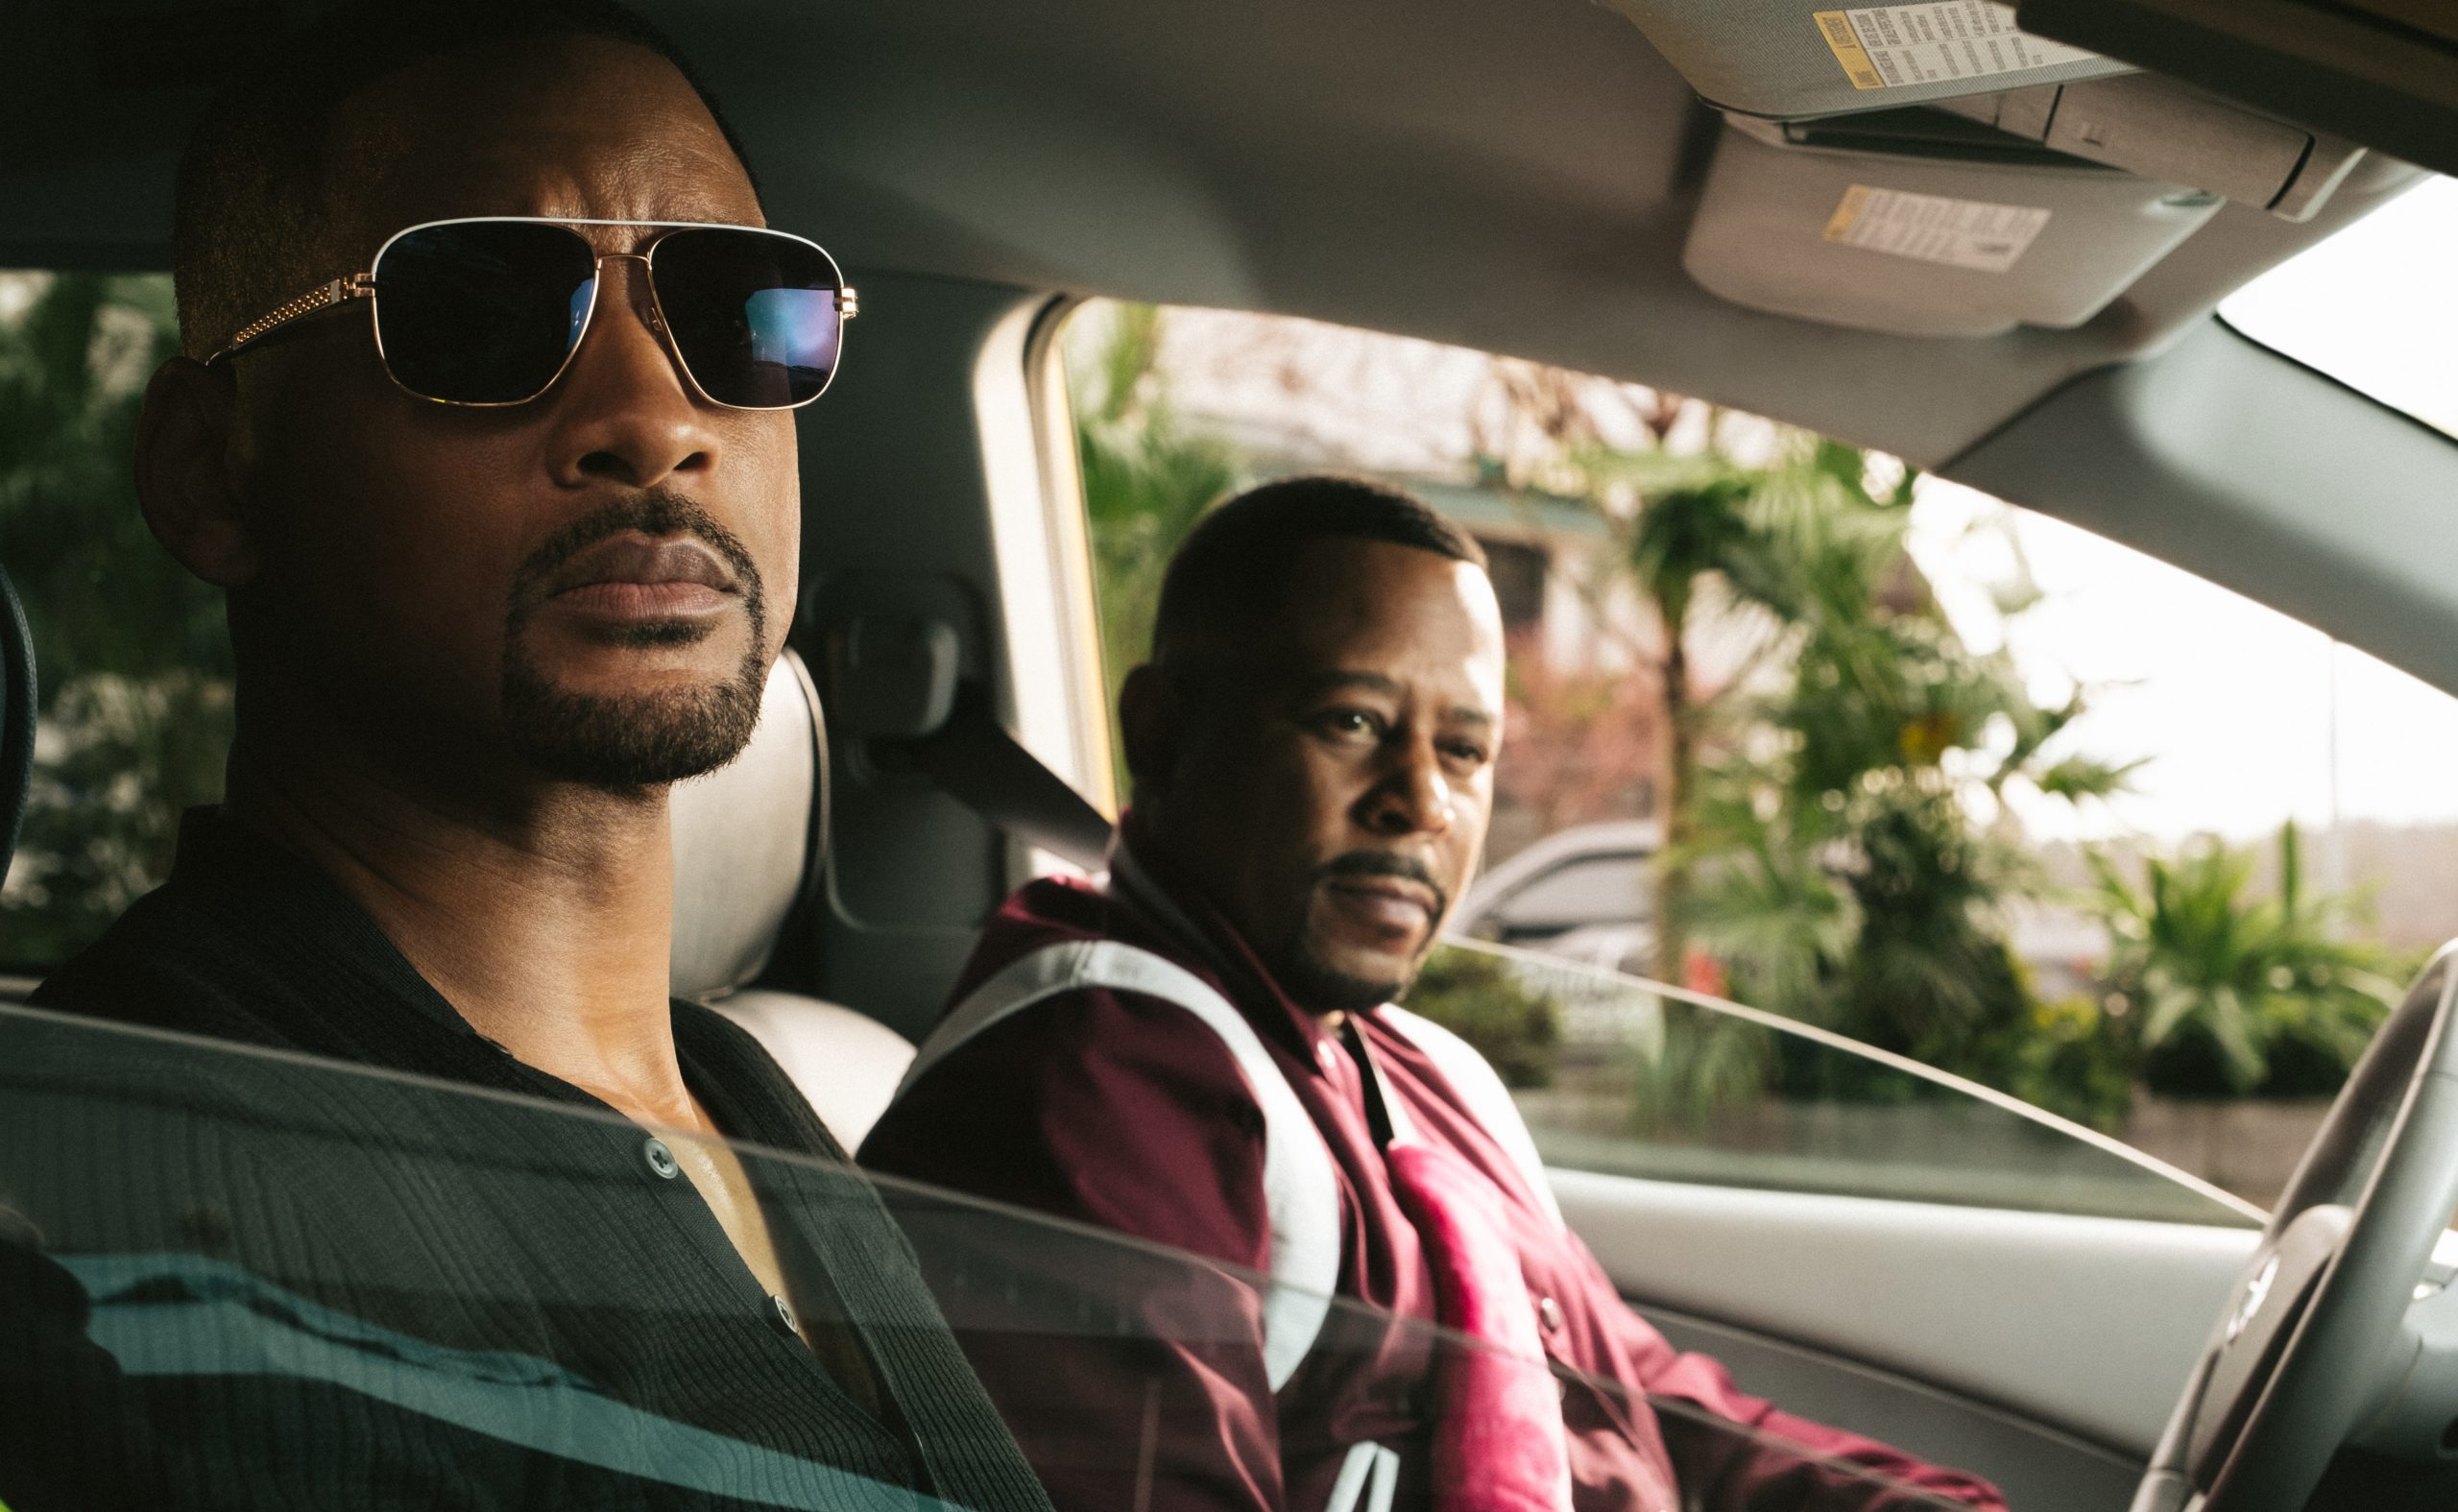 The ‘Bad Boys’ — Will Smith & Martin Lawrence — Are Back … But Why The Wait?